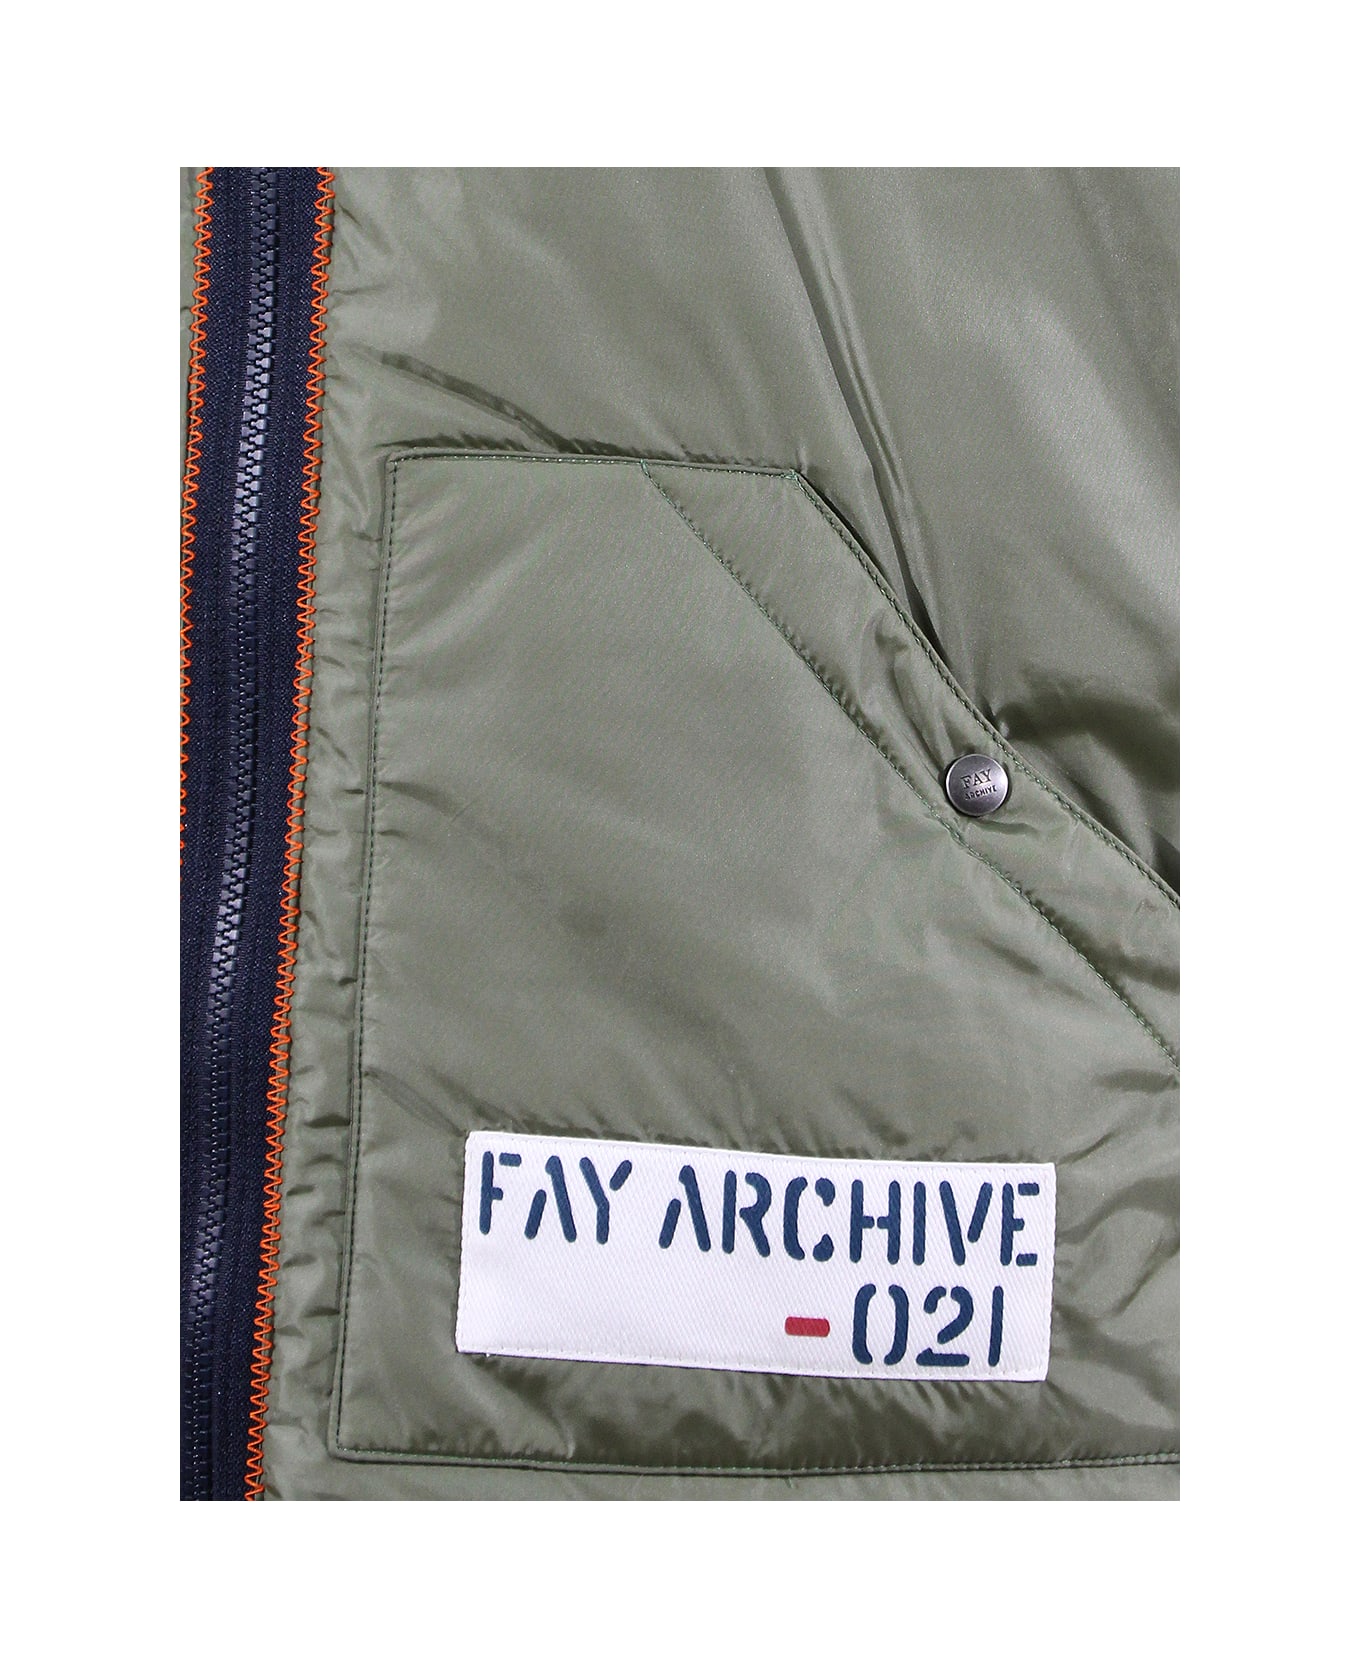 Fay Achive Padded Vest - SALVIA SCURO